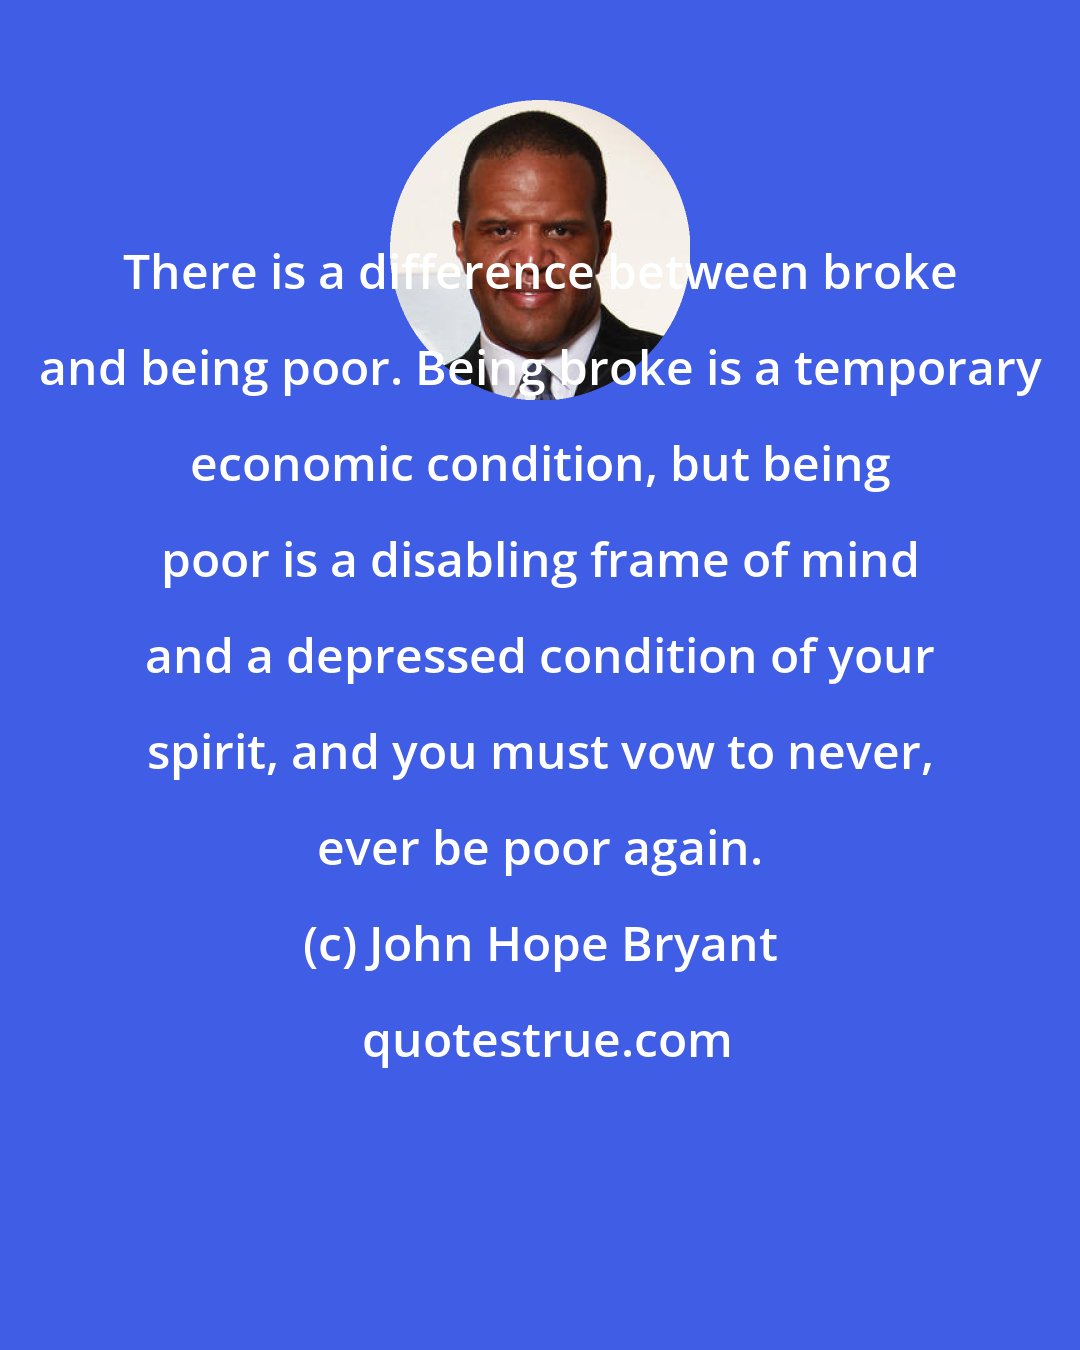 John Hope Bryant: There is a difference between broke and being poor. Being broke is a temporary economic condition, but being poor is a disabling frame of mind and a depressed condition of your spirit, and you must vow to never, ever be poor again.